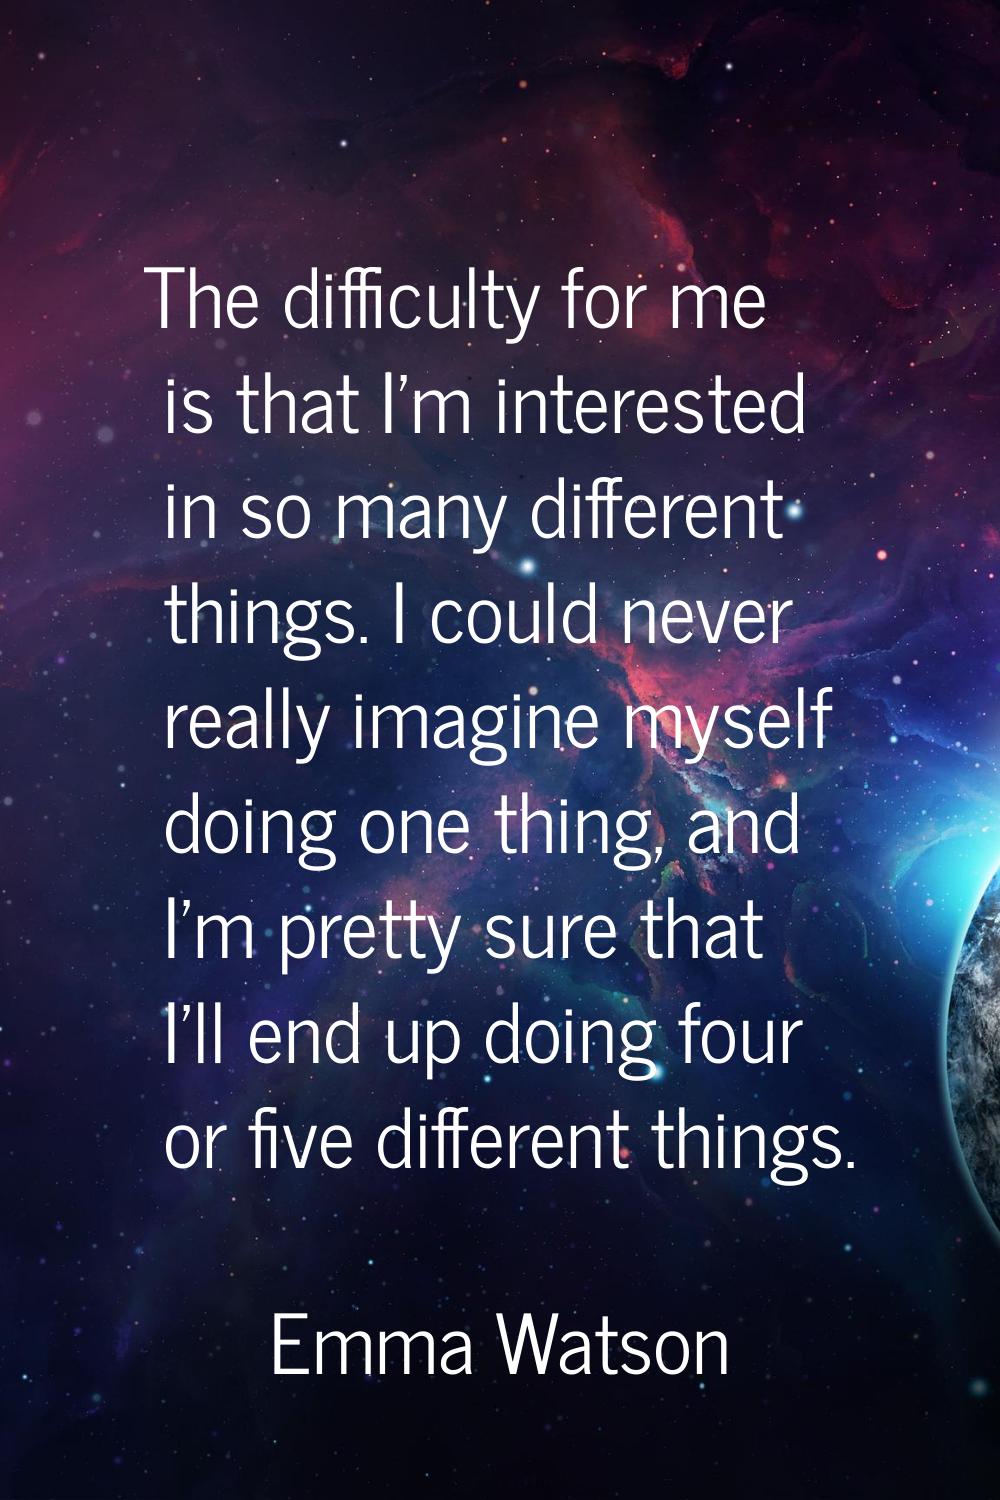 The difficulty for me is that I'm interested in so many different things. I could never really imag